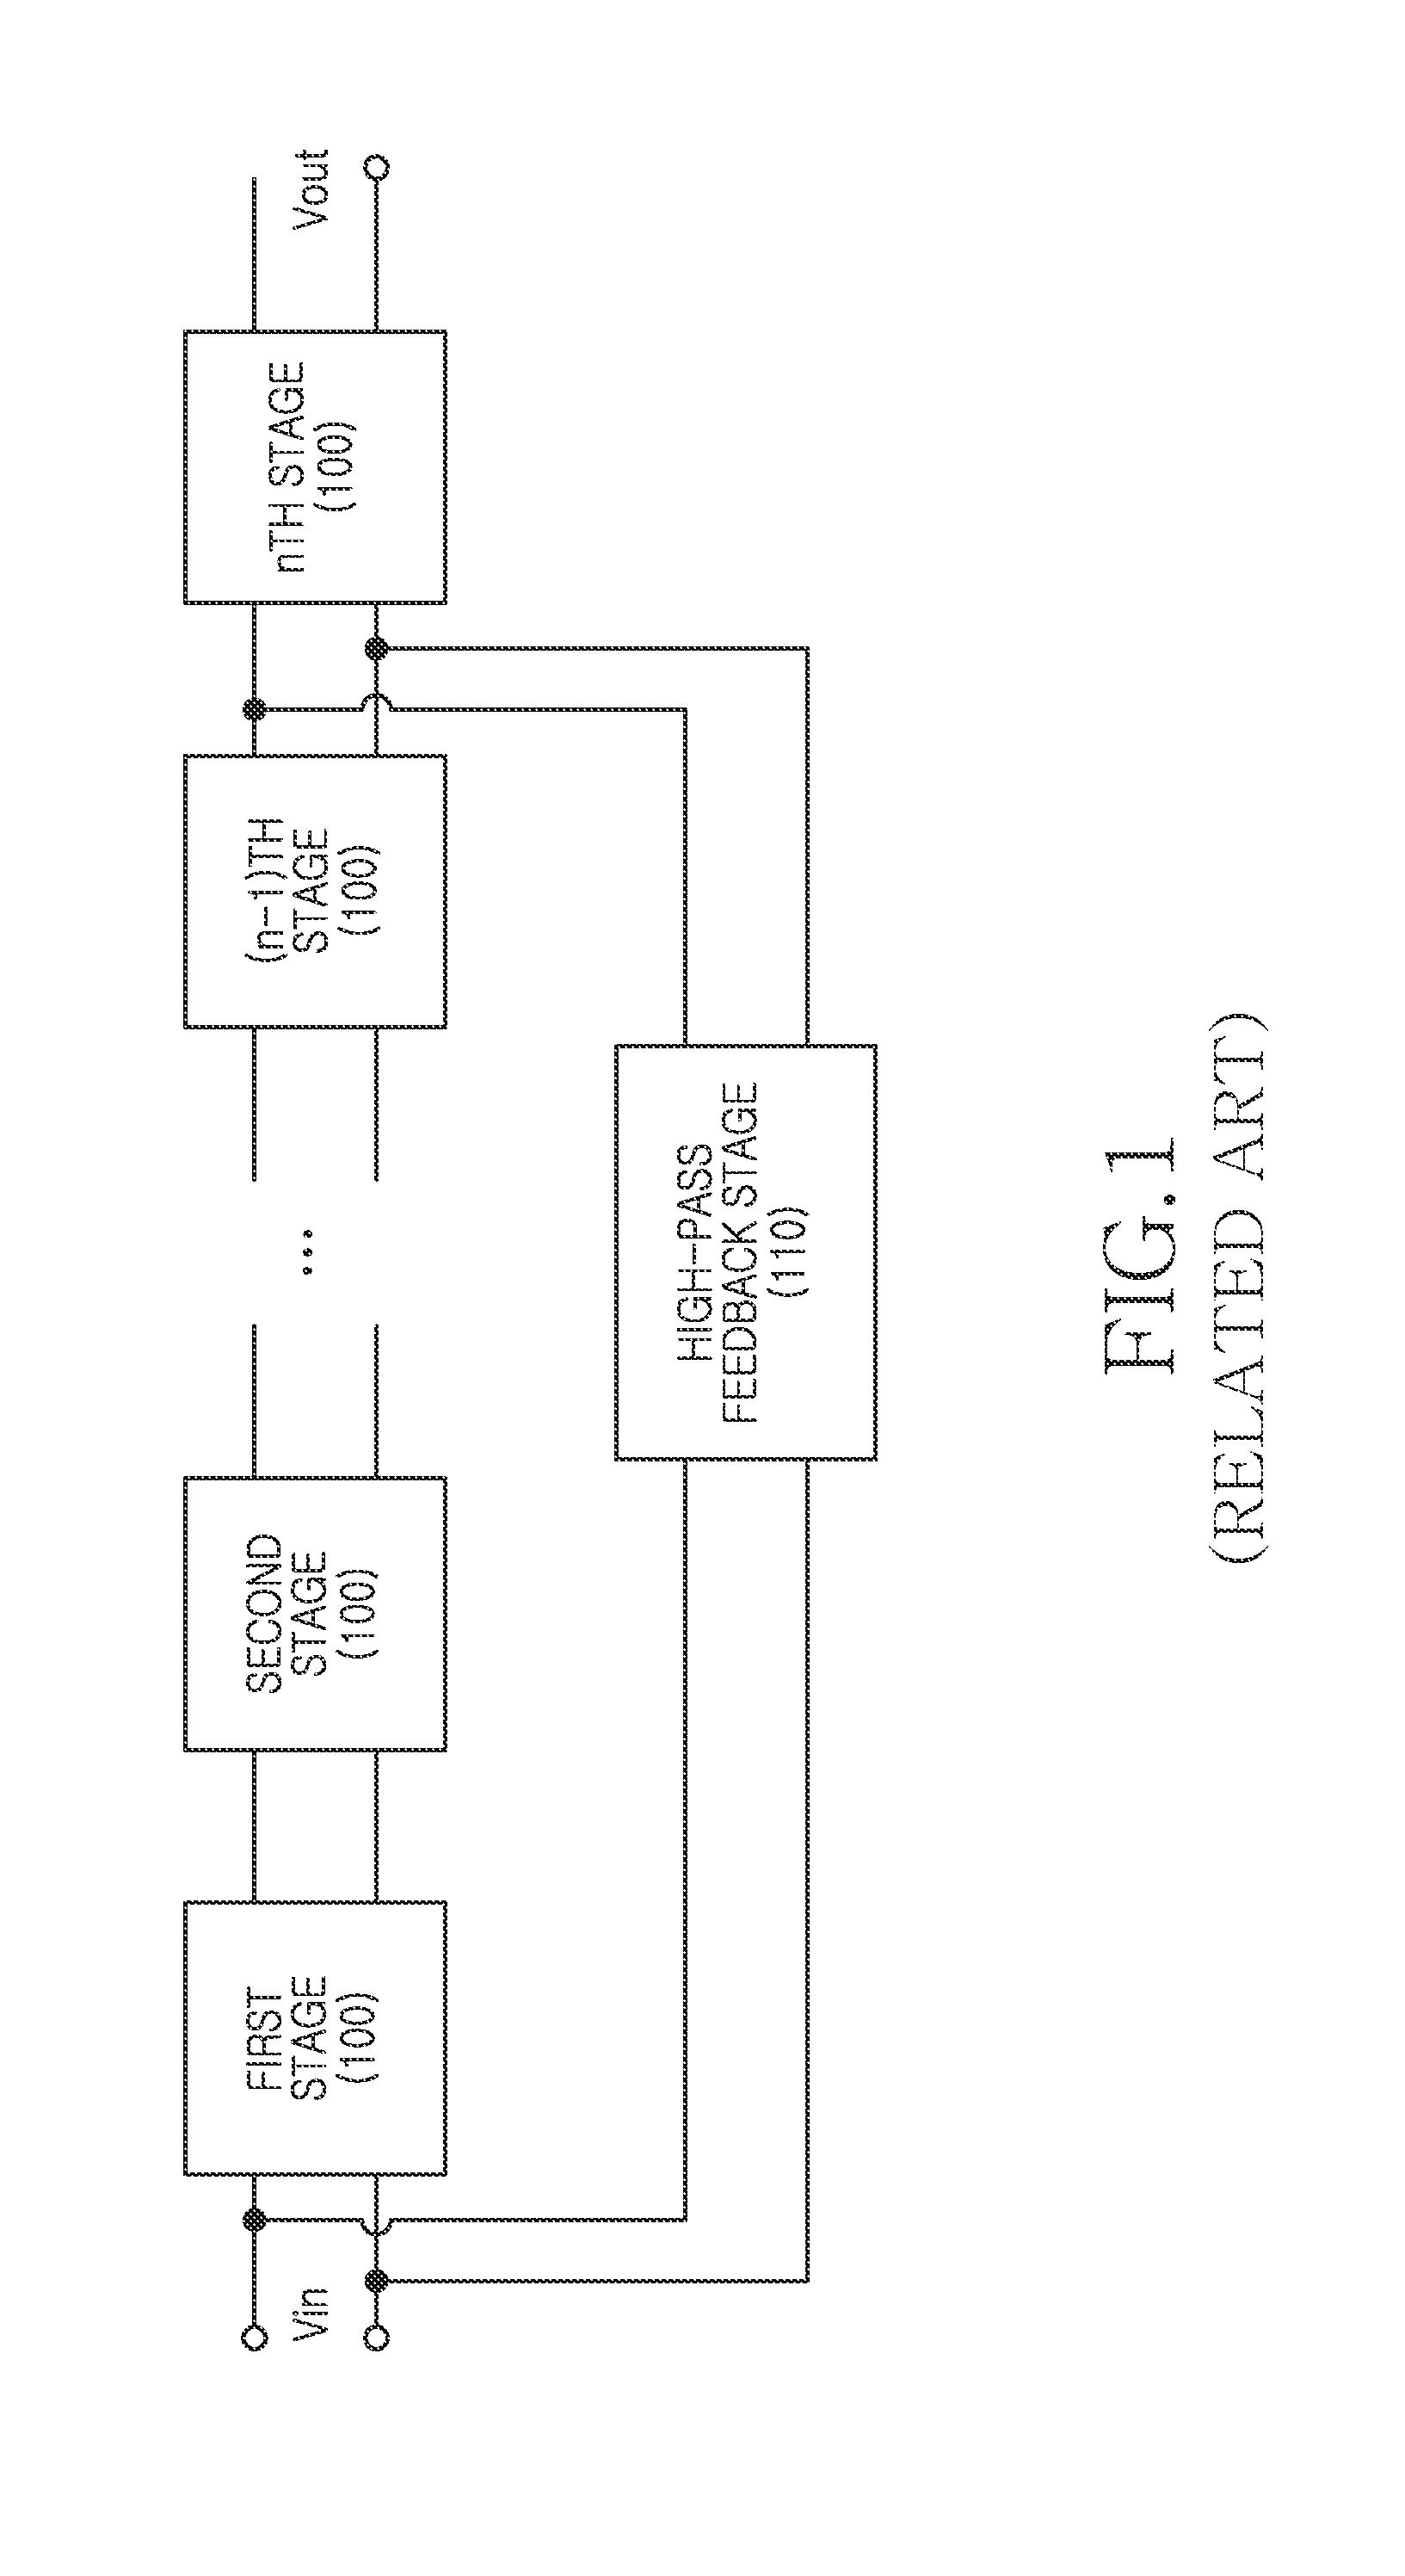 Amplifier and filter having cutoff frequency controlled according to digital code